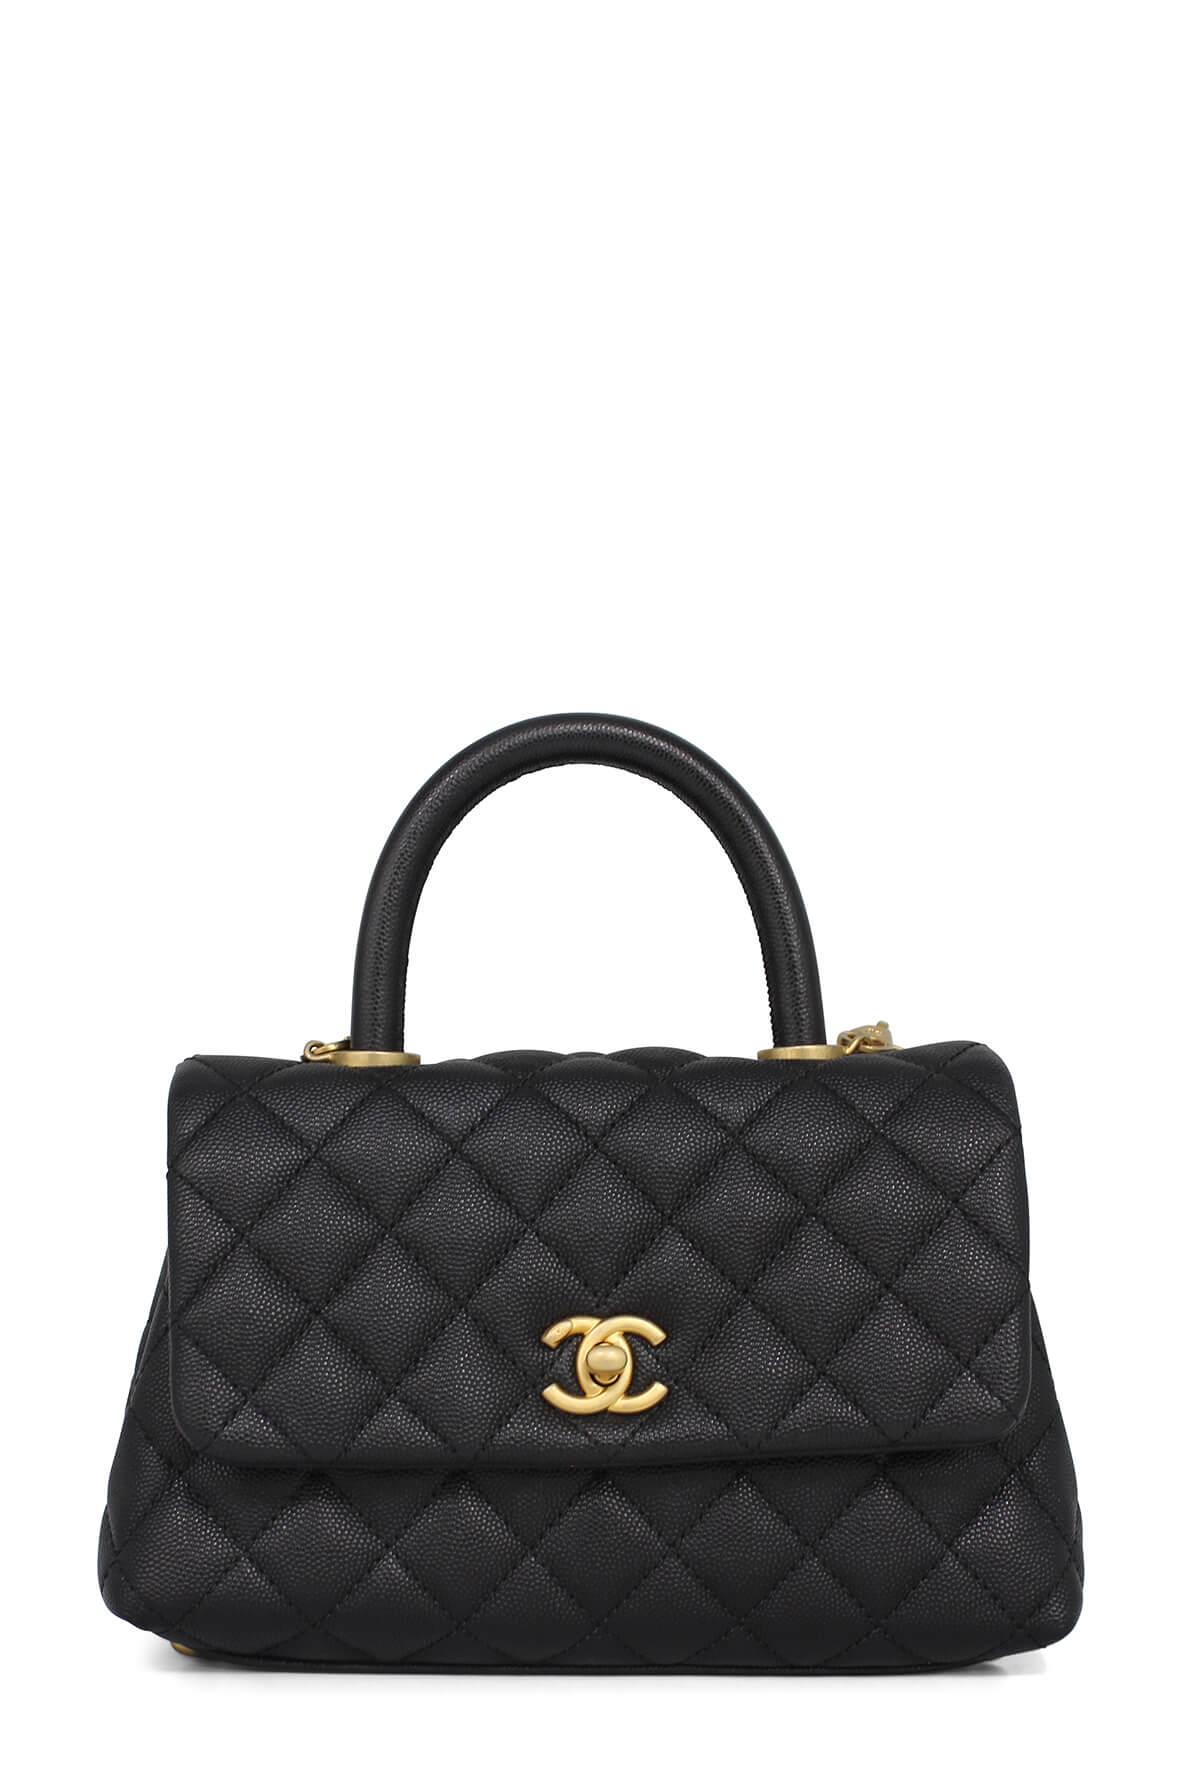 Quilted Caviar Mini Coco Top Handle Black with Gold Hardware